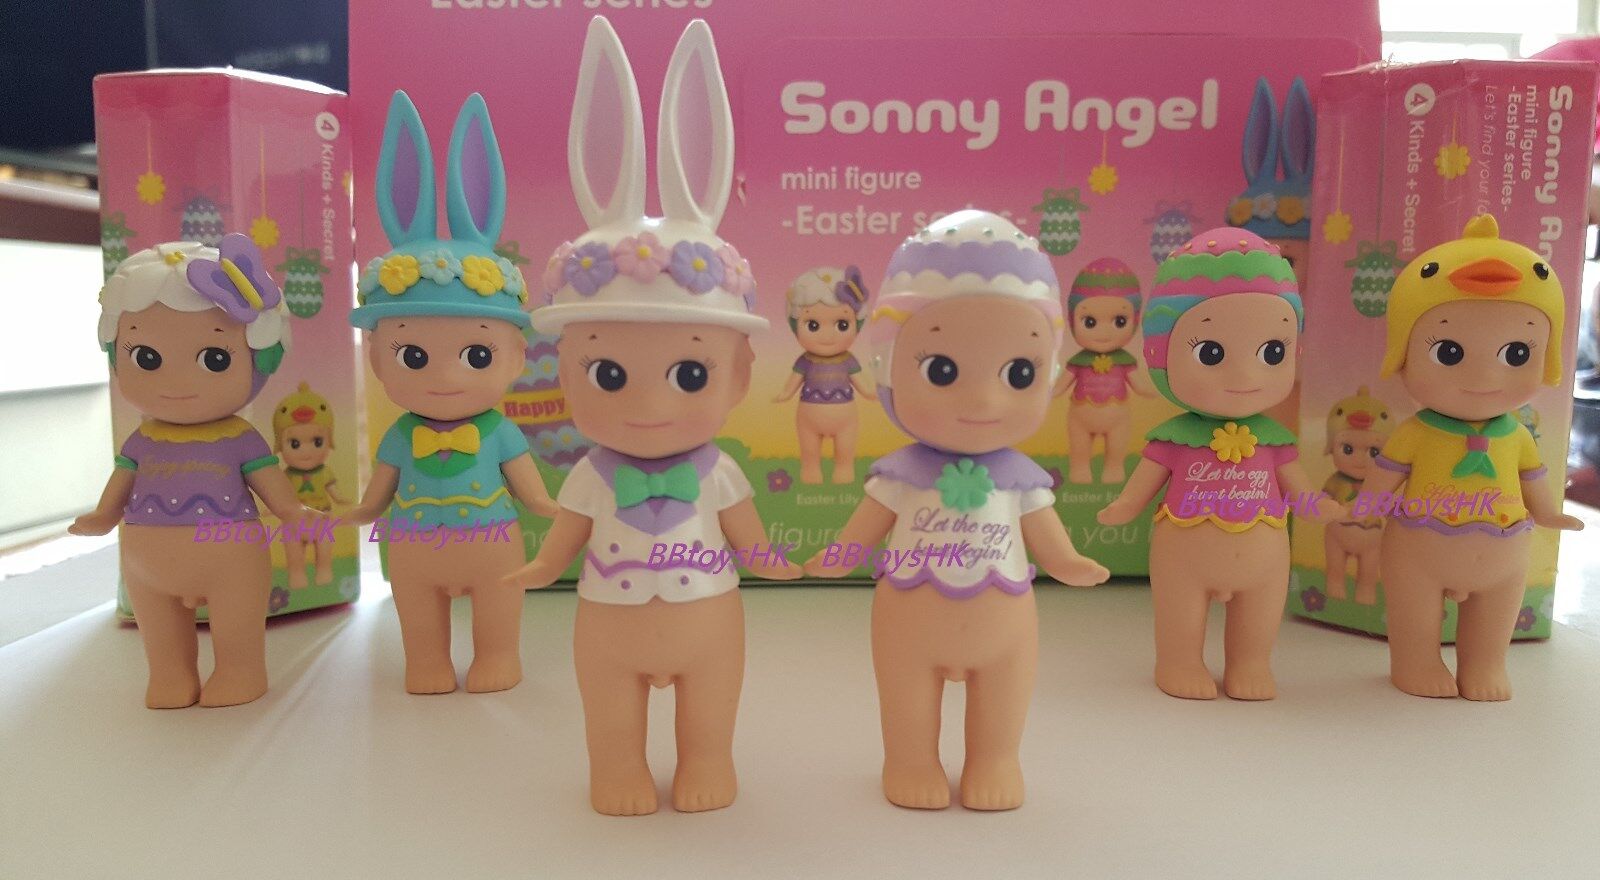 2016 Dreams Sonny Angel Mini Figure Easter Series Limited Full Set 6 pieces